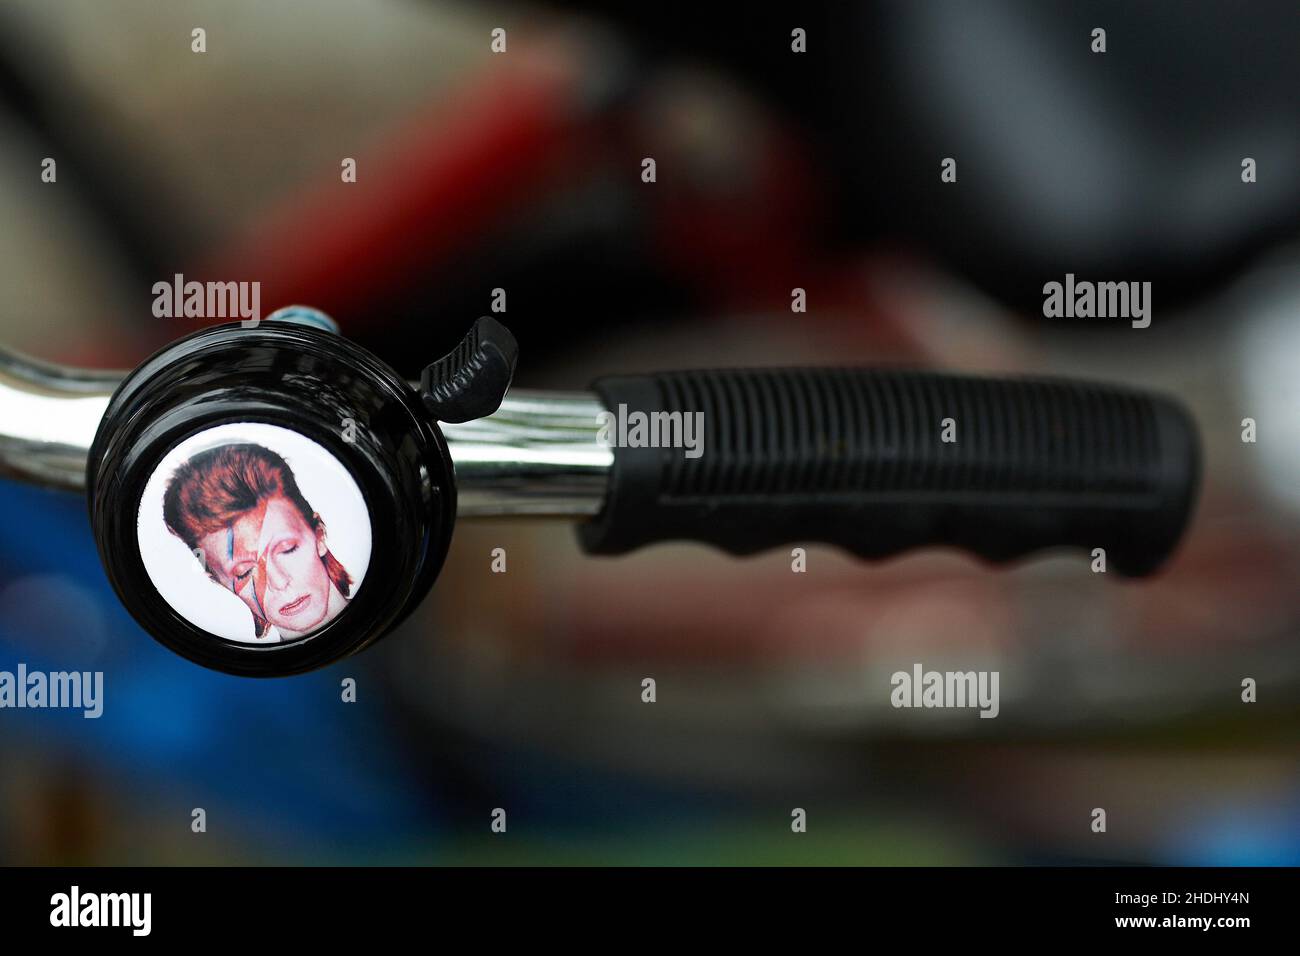 David Bowie – Ziggy Stardust bicycle bell .Bicycle handlebar with bell with blurred background. Stock Photo